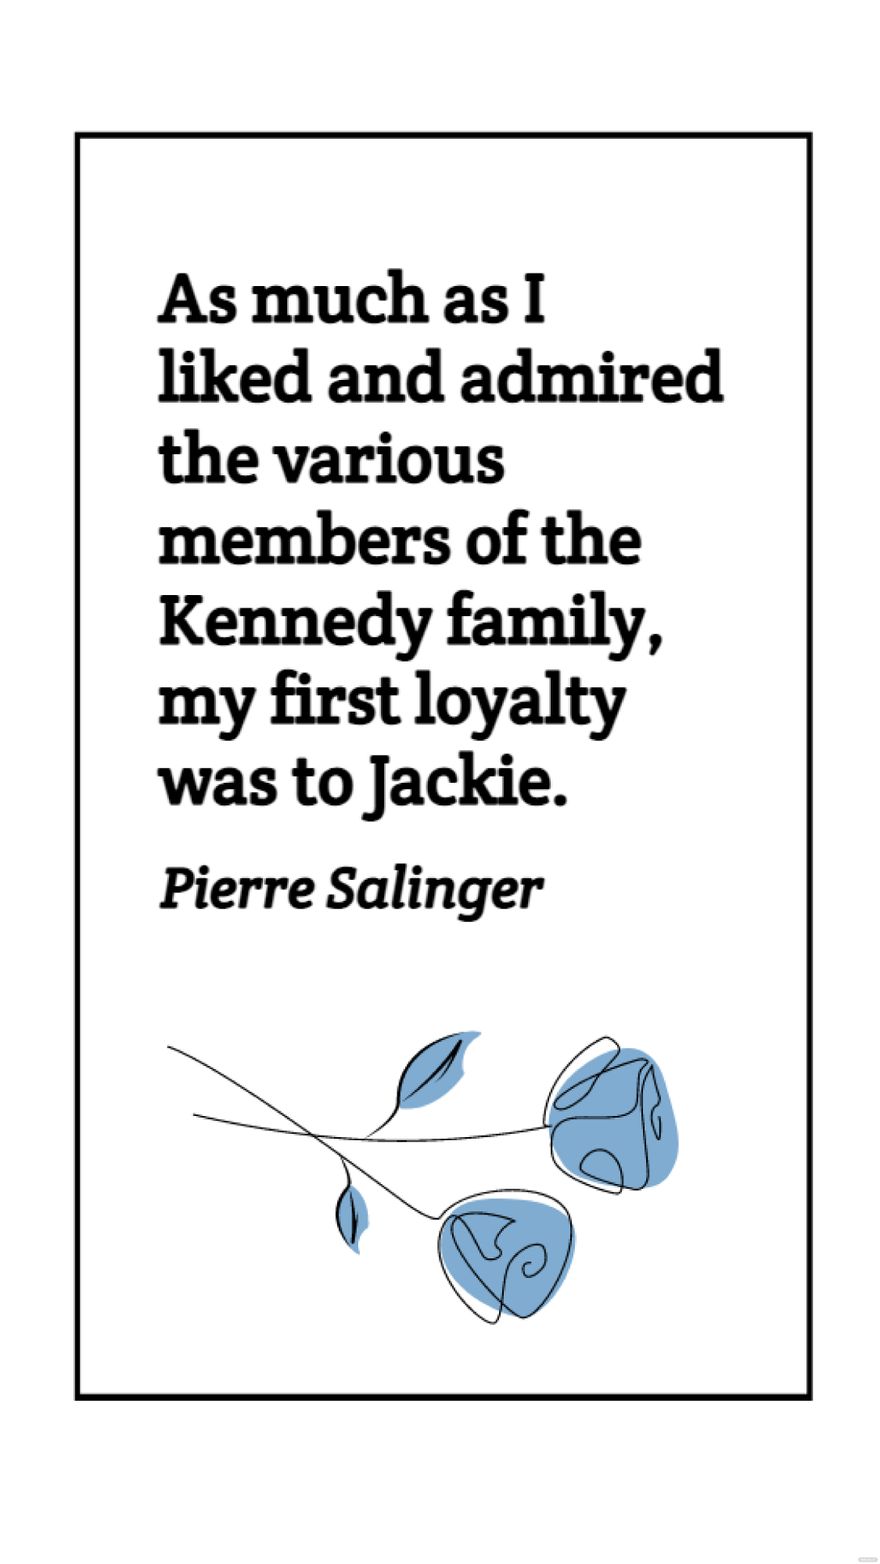 Pierre Salinger - As much as I liked and admired the various members of the Kennedy family, my first loyalty was to Jackie. in JPG